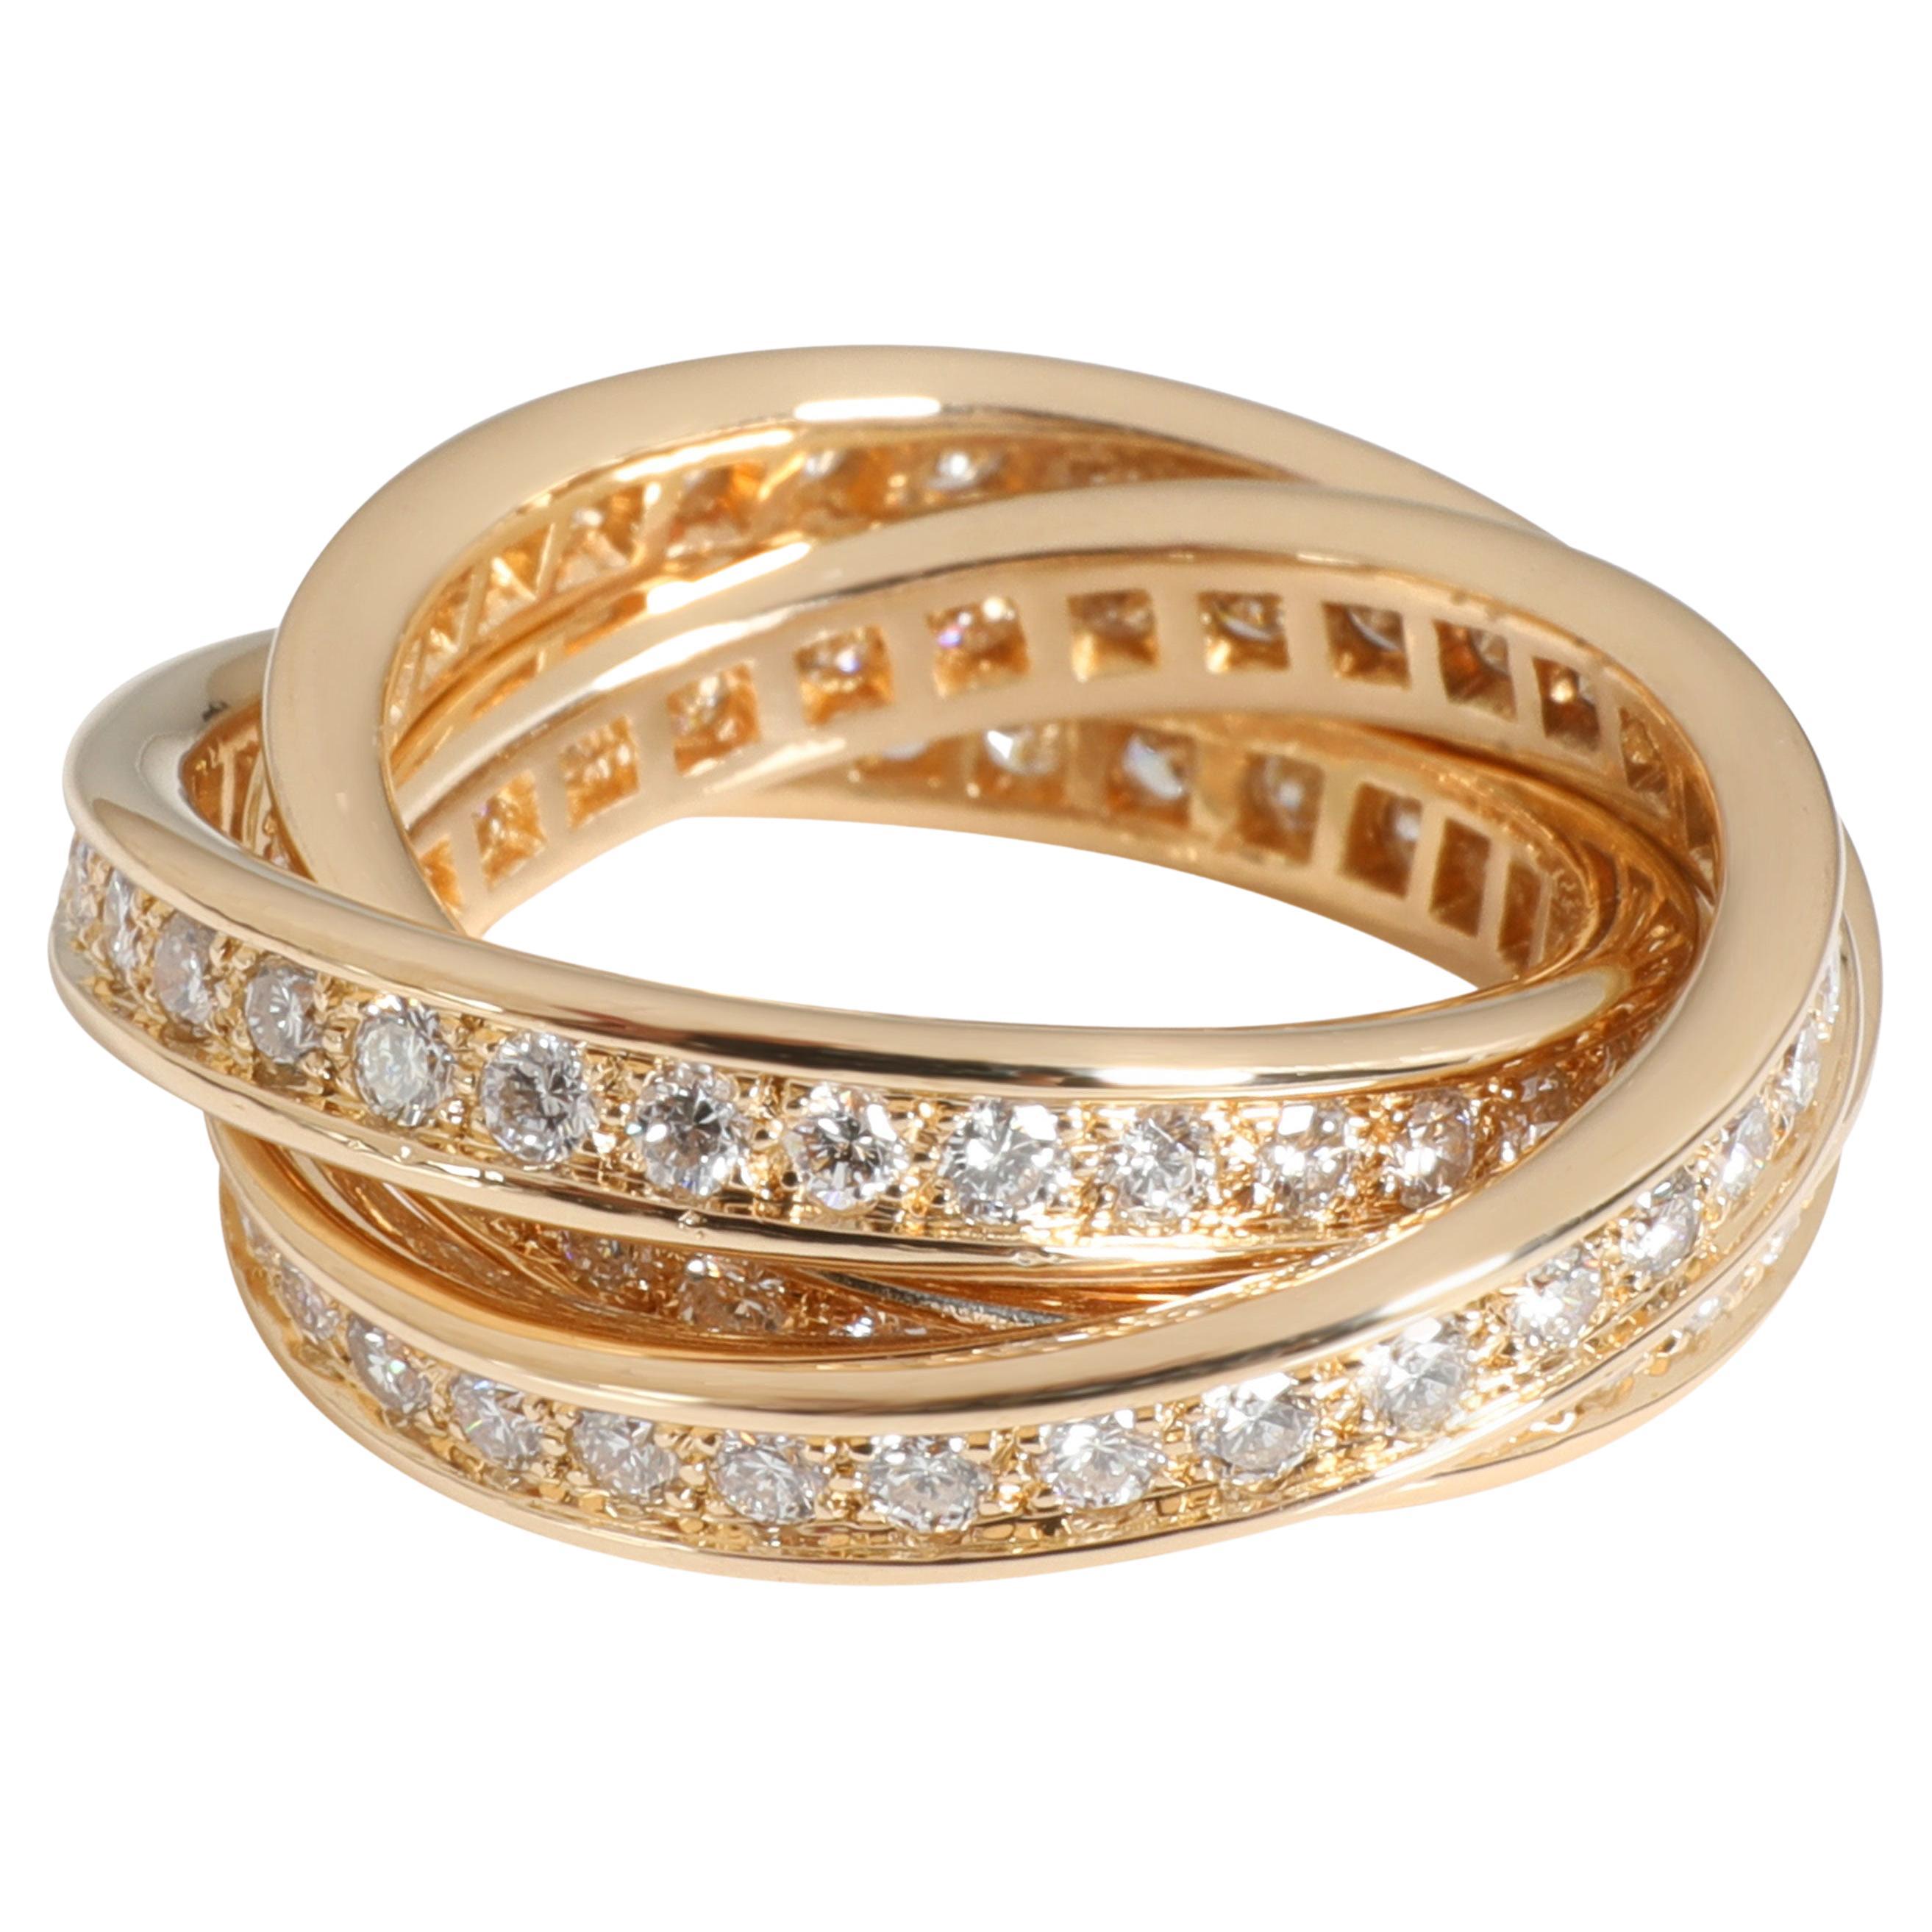 Cartier Vintage Trinity Diamant-Ring in 18k 3 Tone Gold 1,75 CTW im Angebot